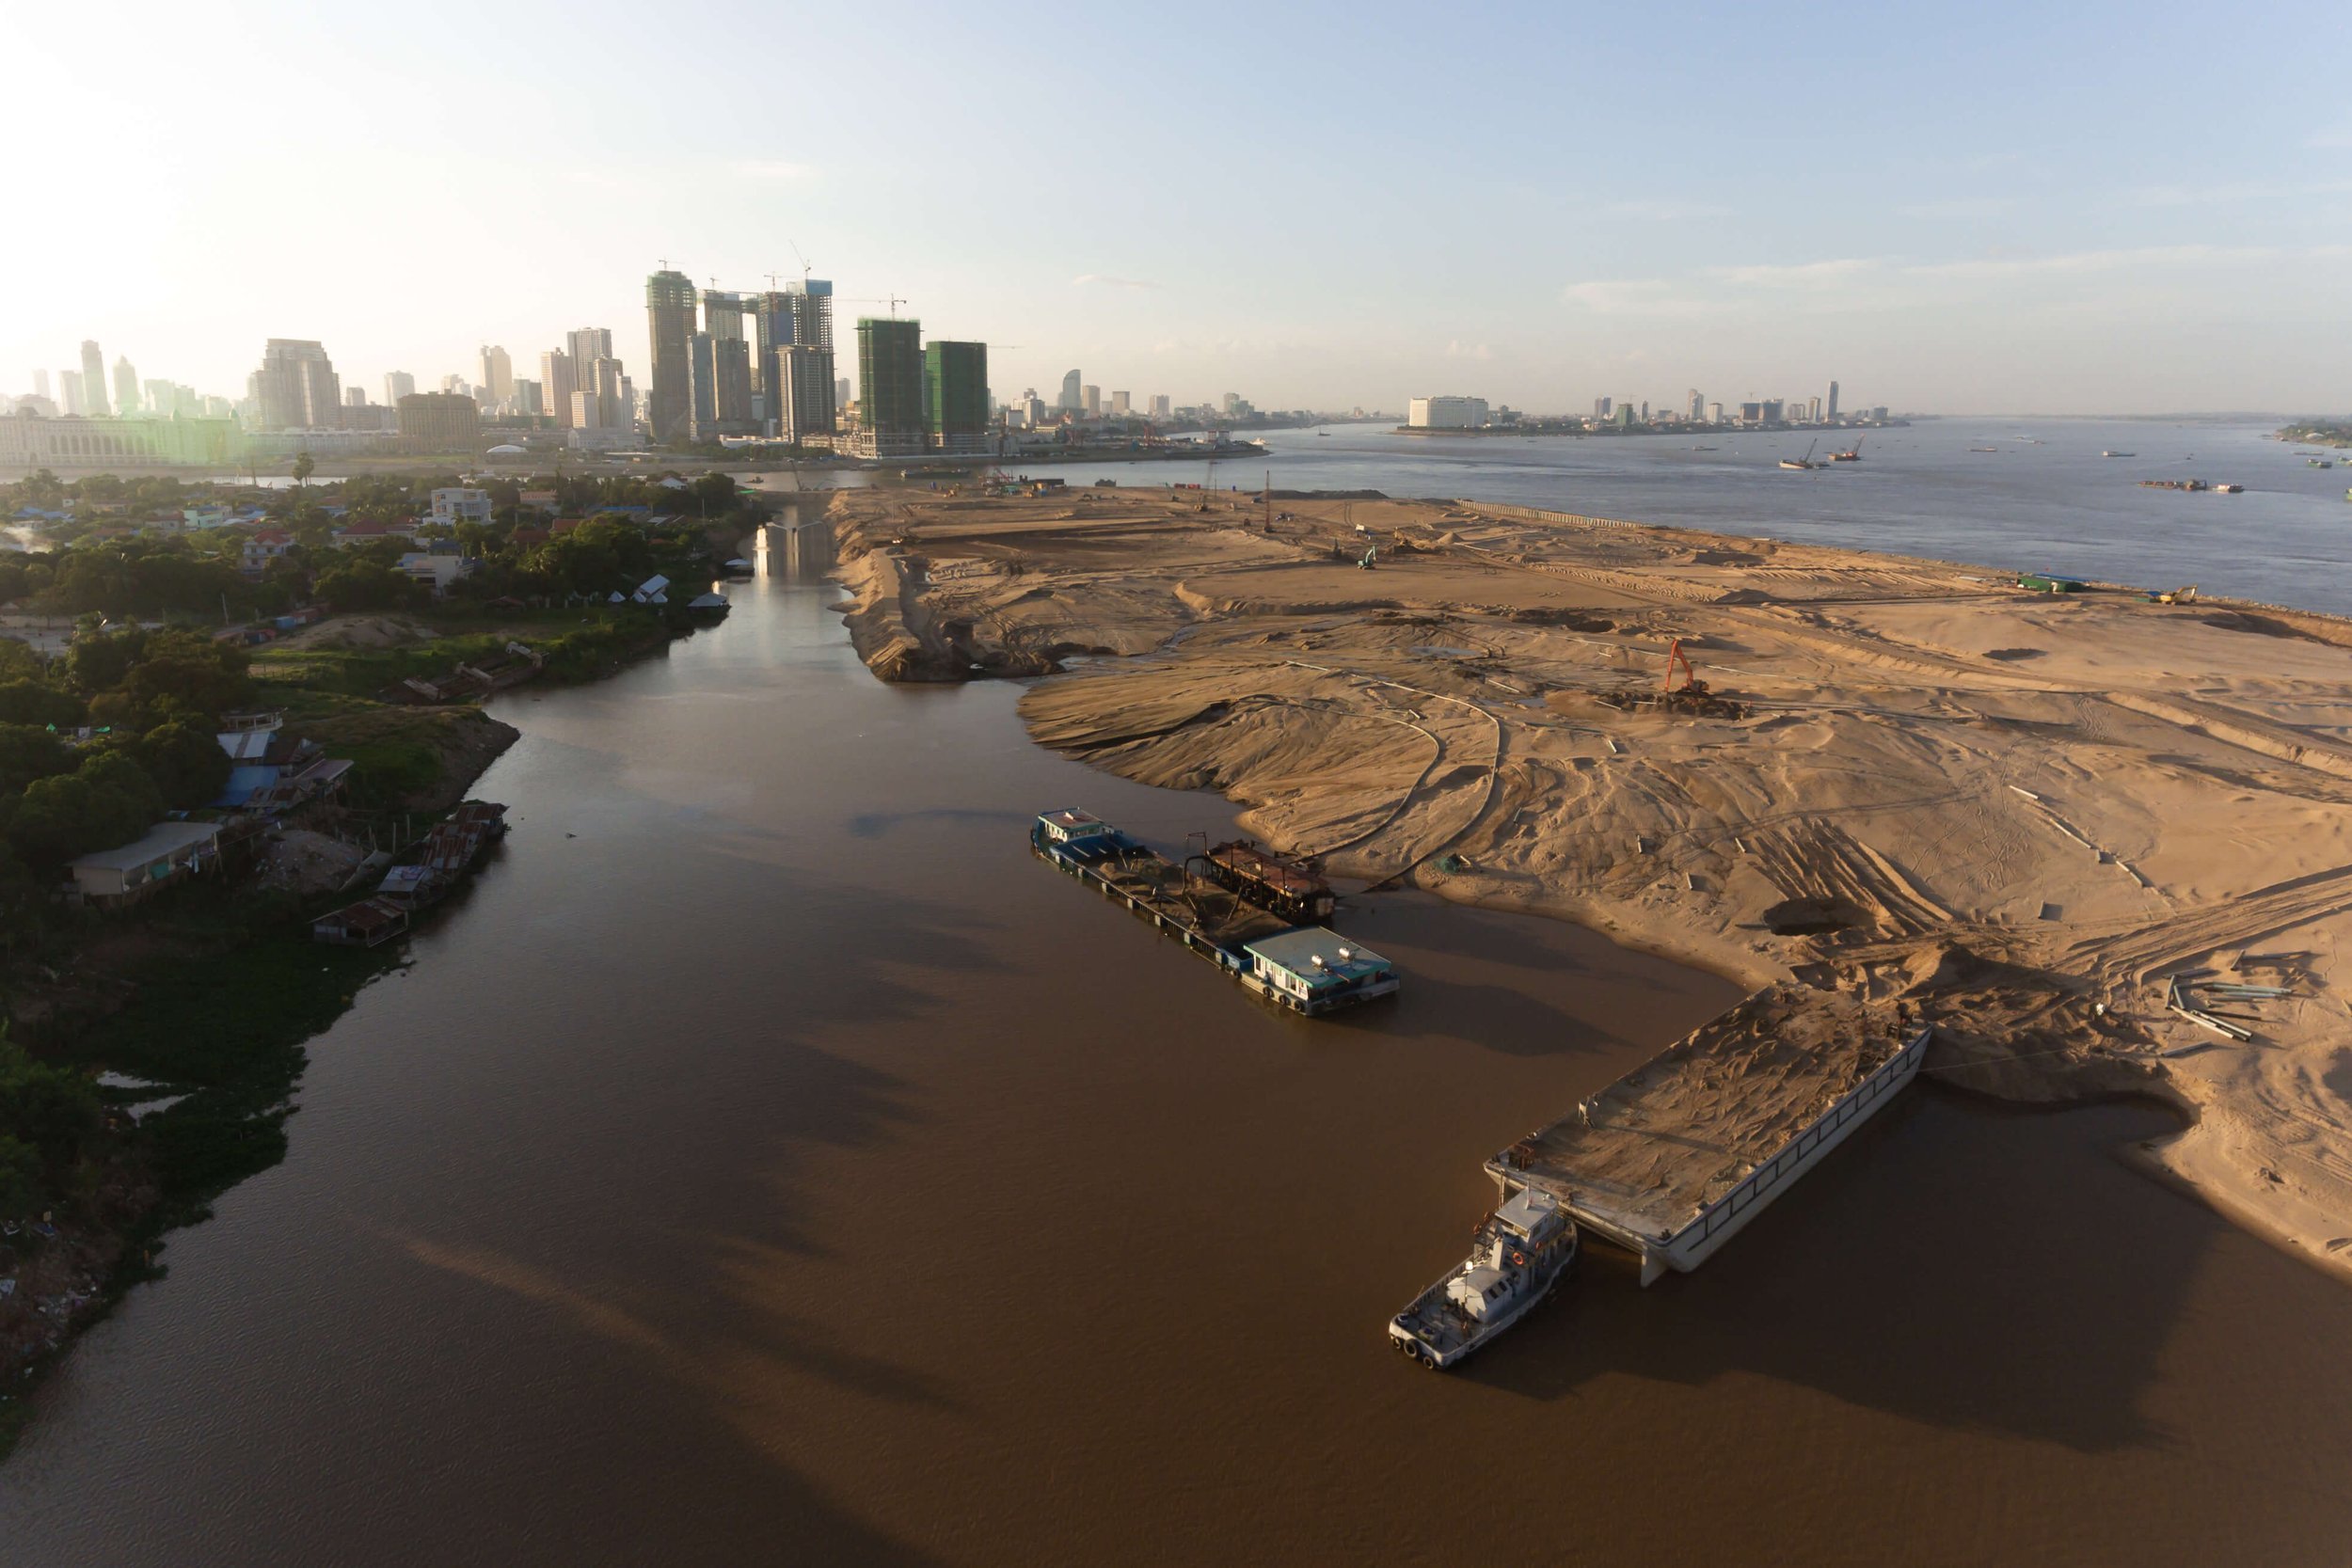  An aerial view of Koh Norea, Phnom Penh’s second artificial island on the Mekong. The mega development, which is yet to publicly produce an Environmental Impact Assessment, has raised concerns among environmentalists and researchers due to the vast 